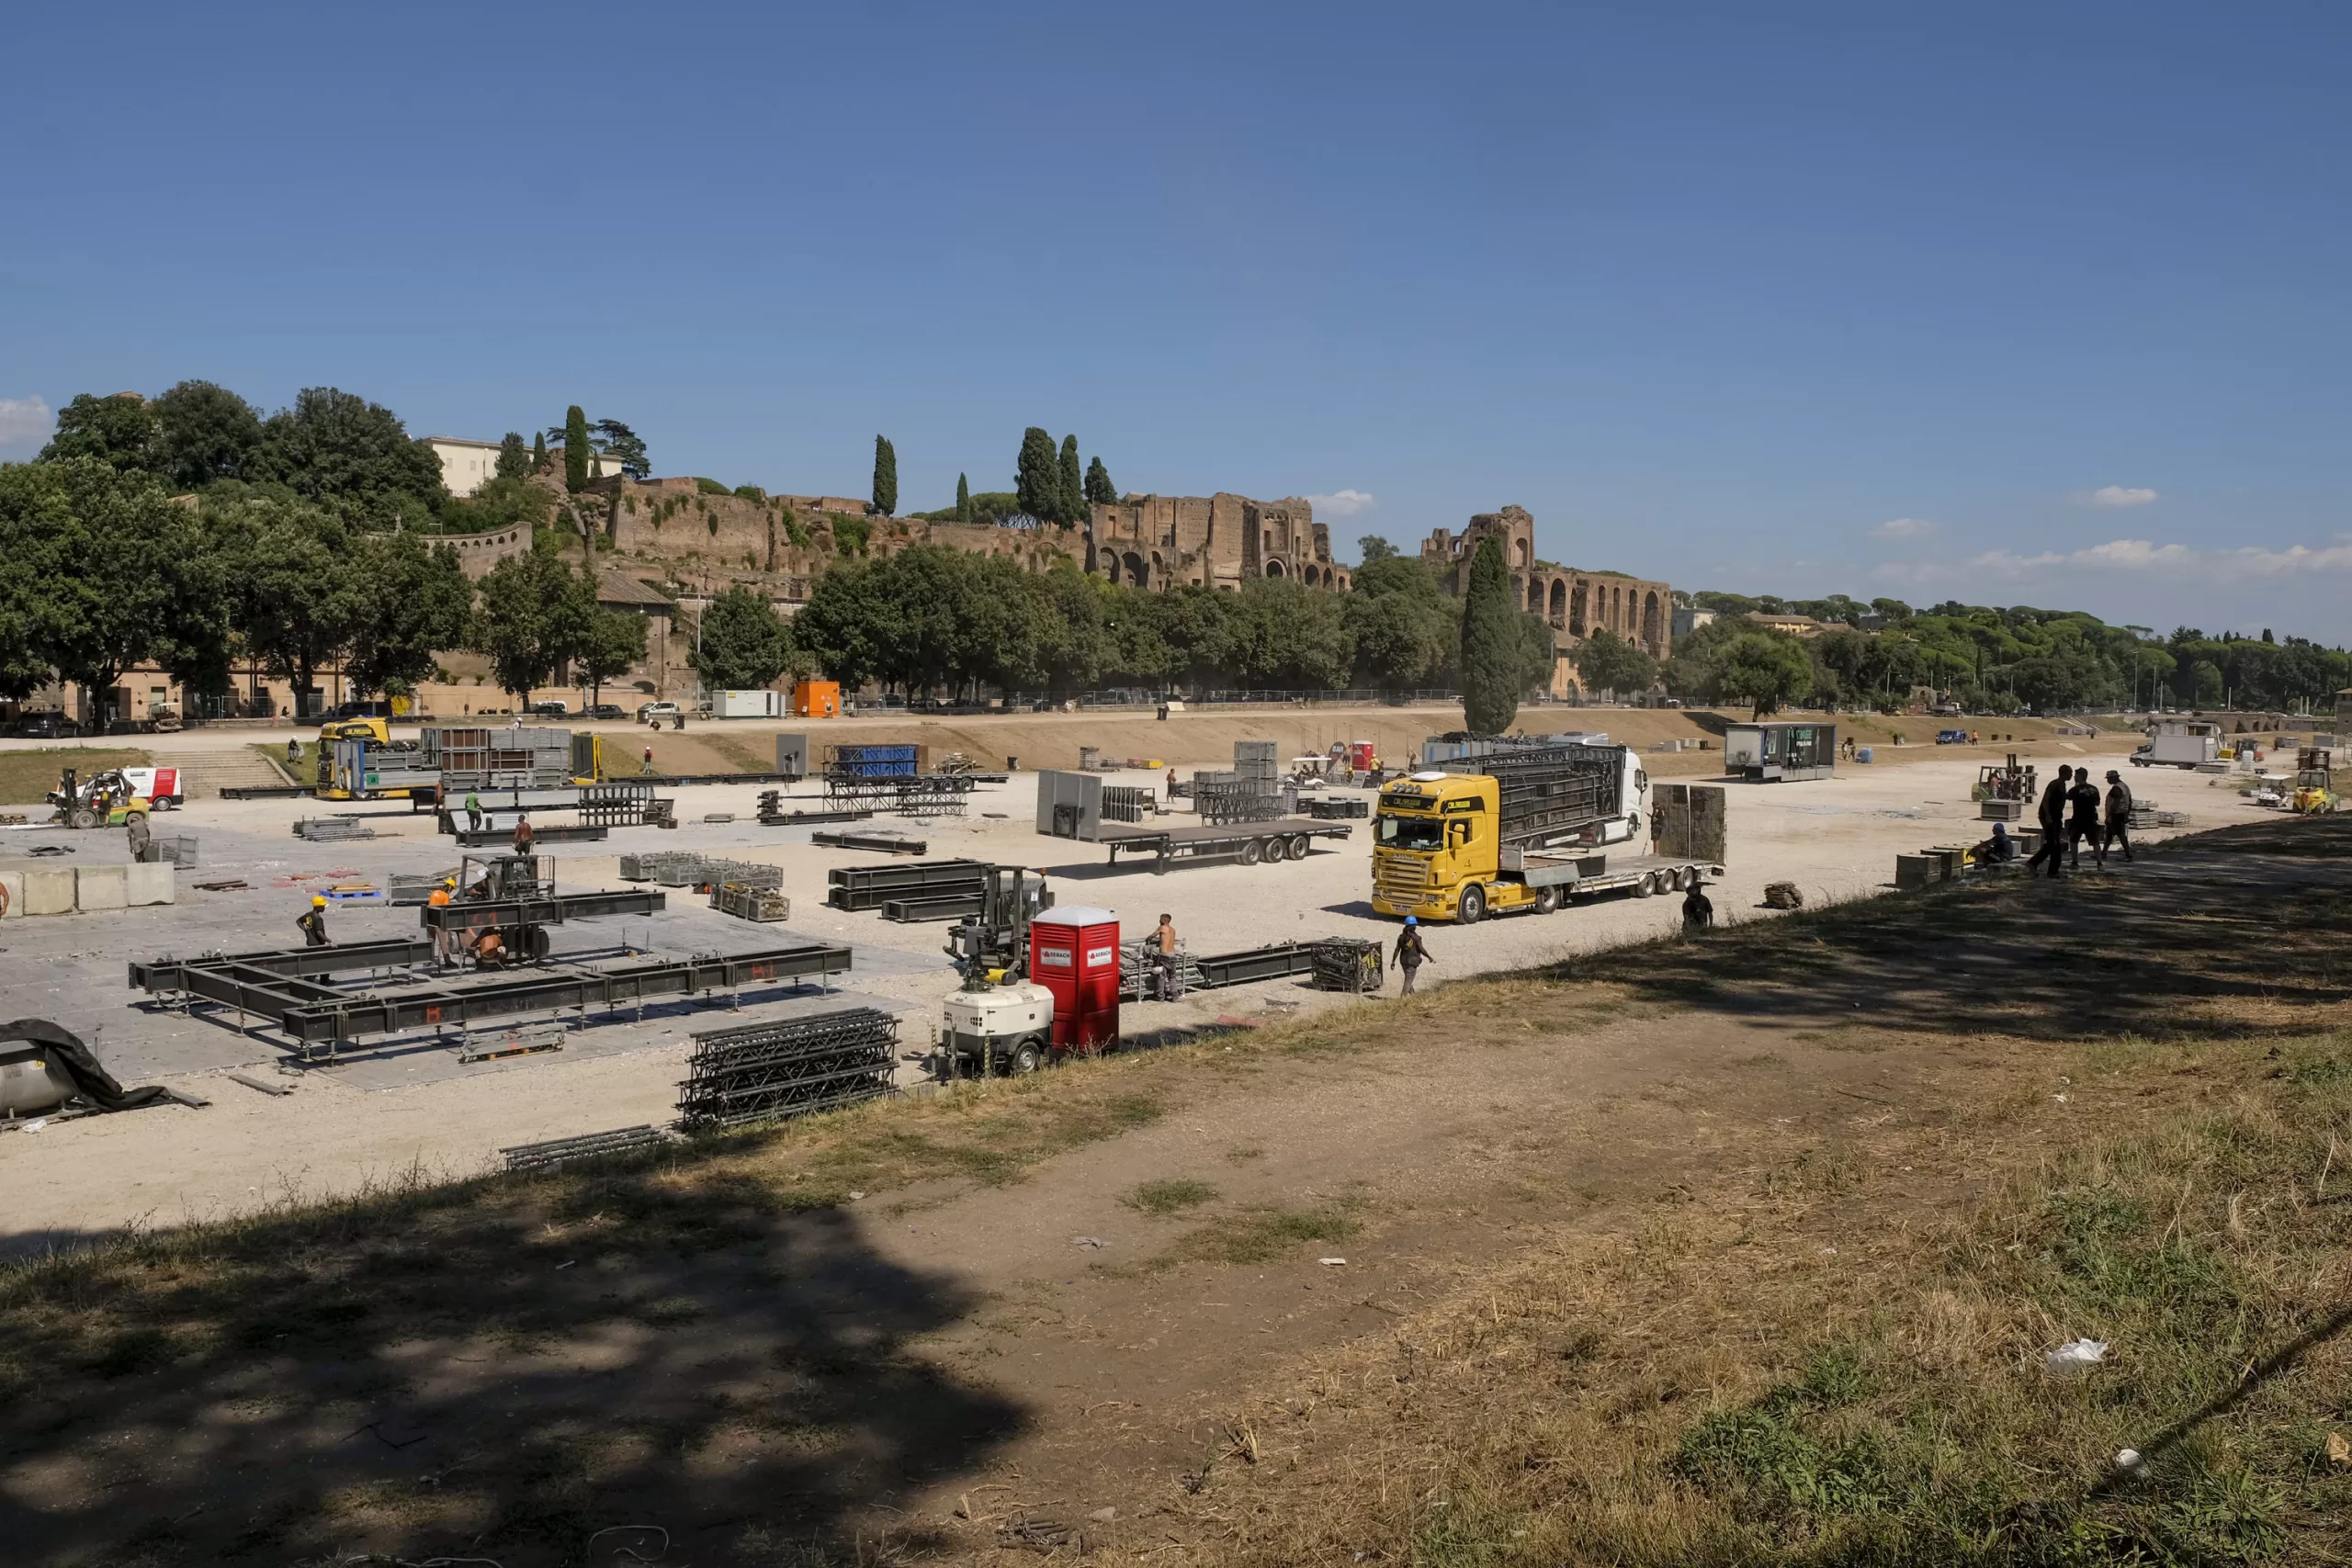 Is the Circus Maximus in Rome the best stage for concerts?
